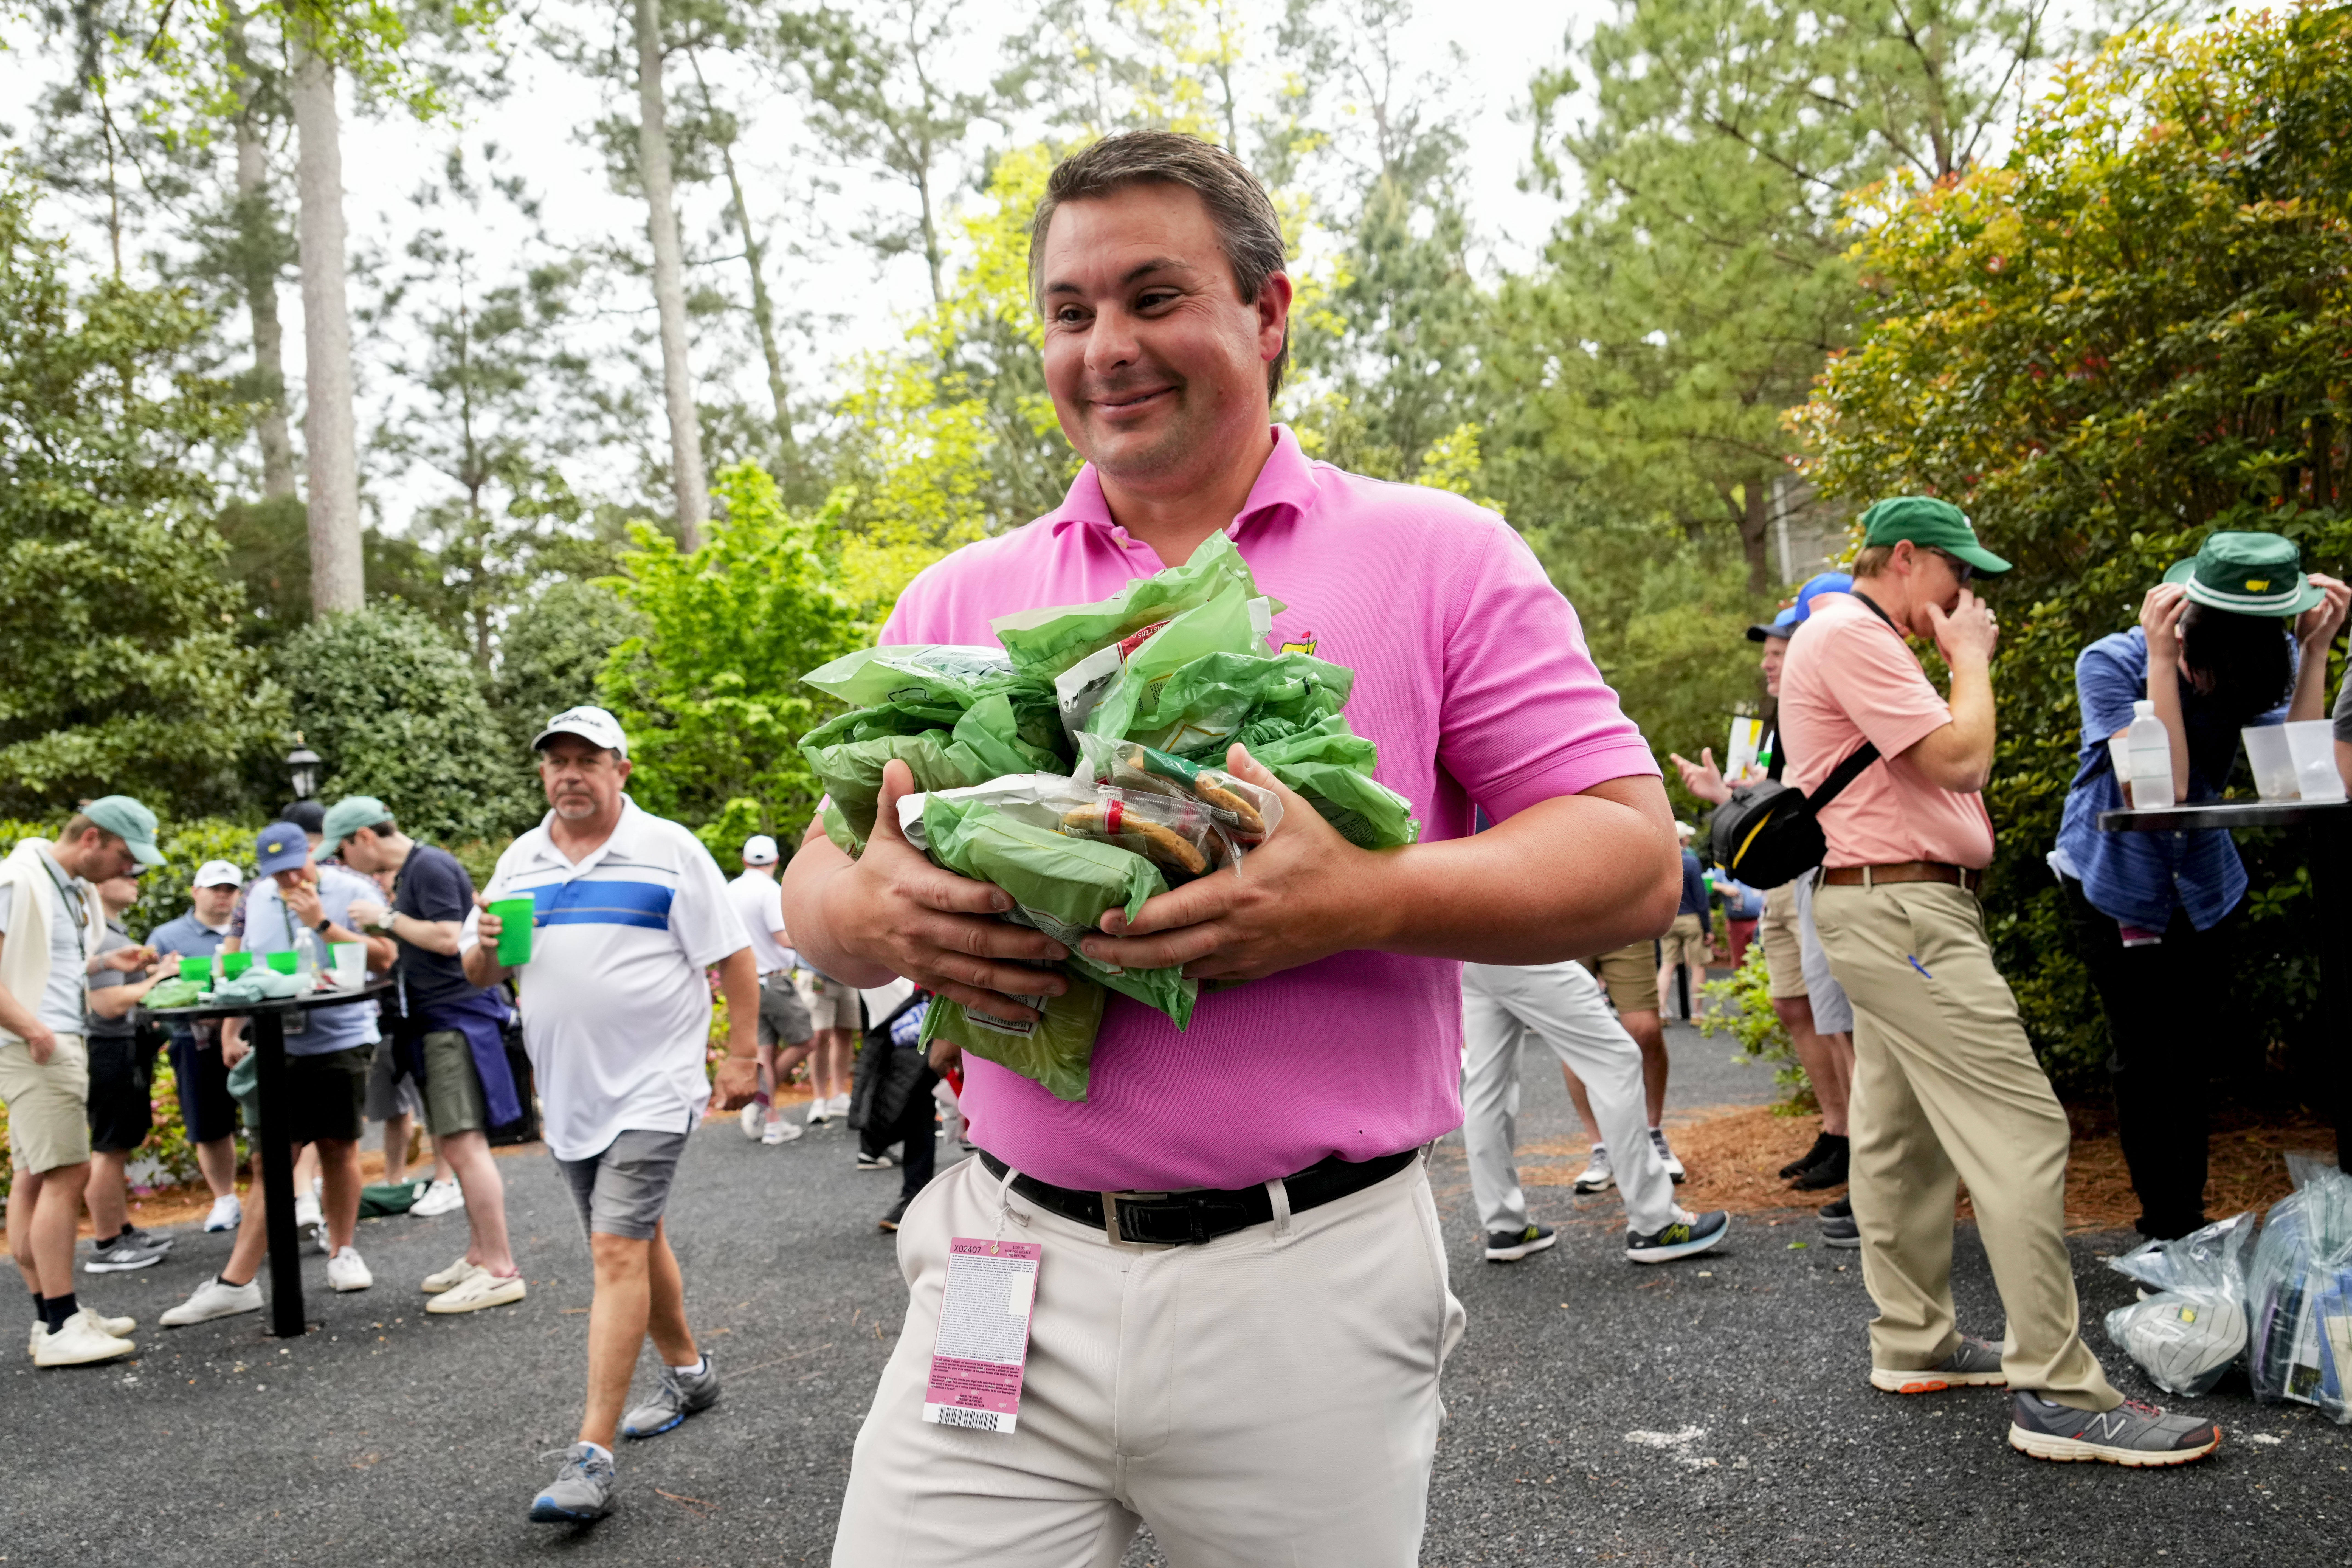 How to build 3 perfect Masters meals for a day at Augusta that’ll cost just $27.50